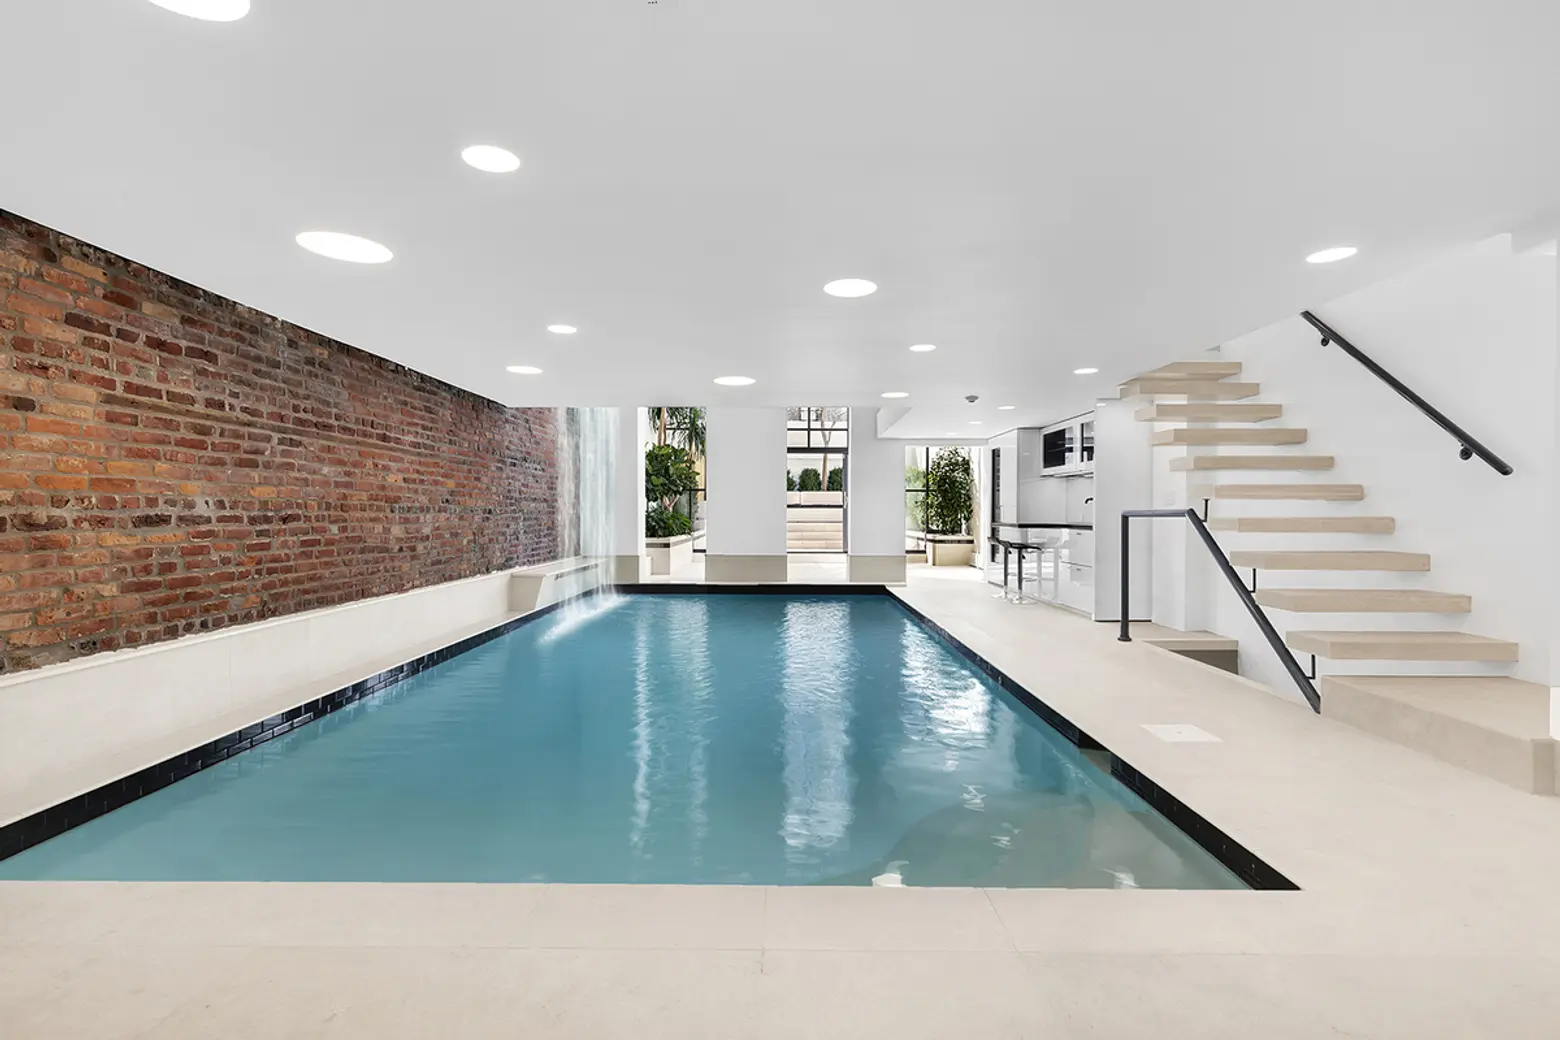 232 West 15th Street, cool listings, chelsea, swimming pool, pool, saltwater pool, pool house, waterfall, townhouse, quirky homes, manhattan townhouse for sale, interiors, pool in living room, evelyn mcmurray, evie mcmurray,